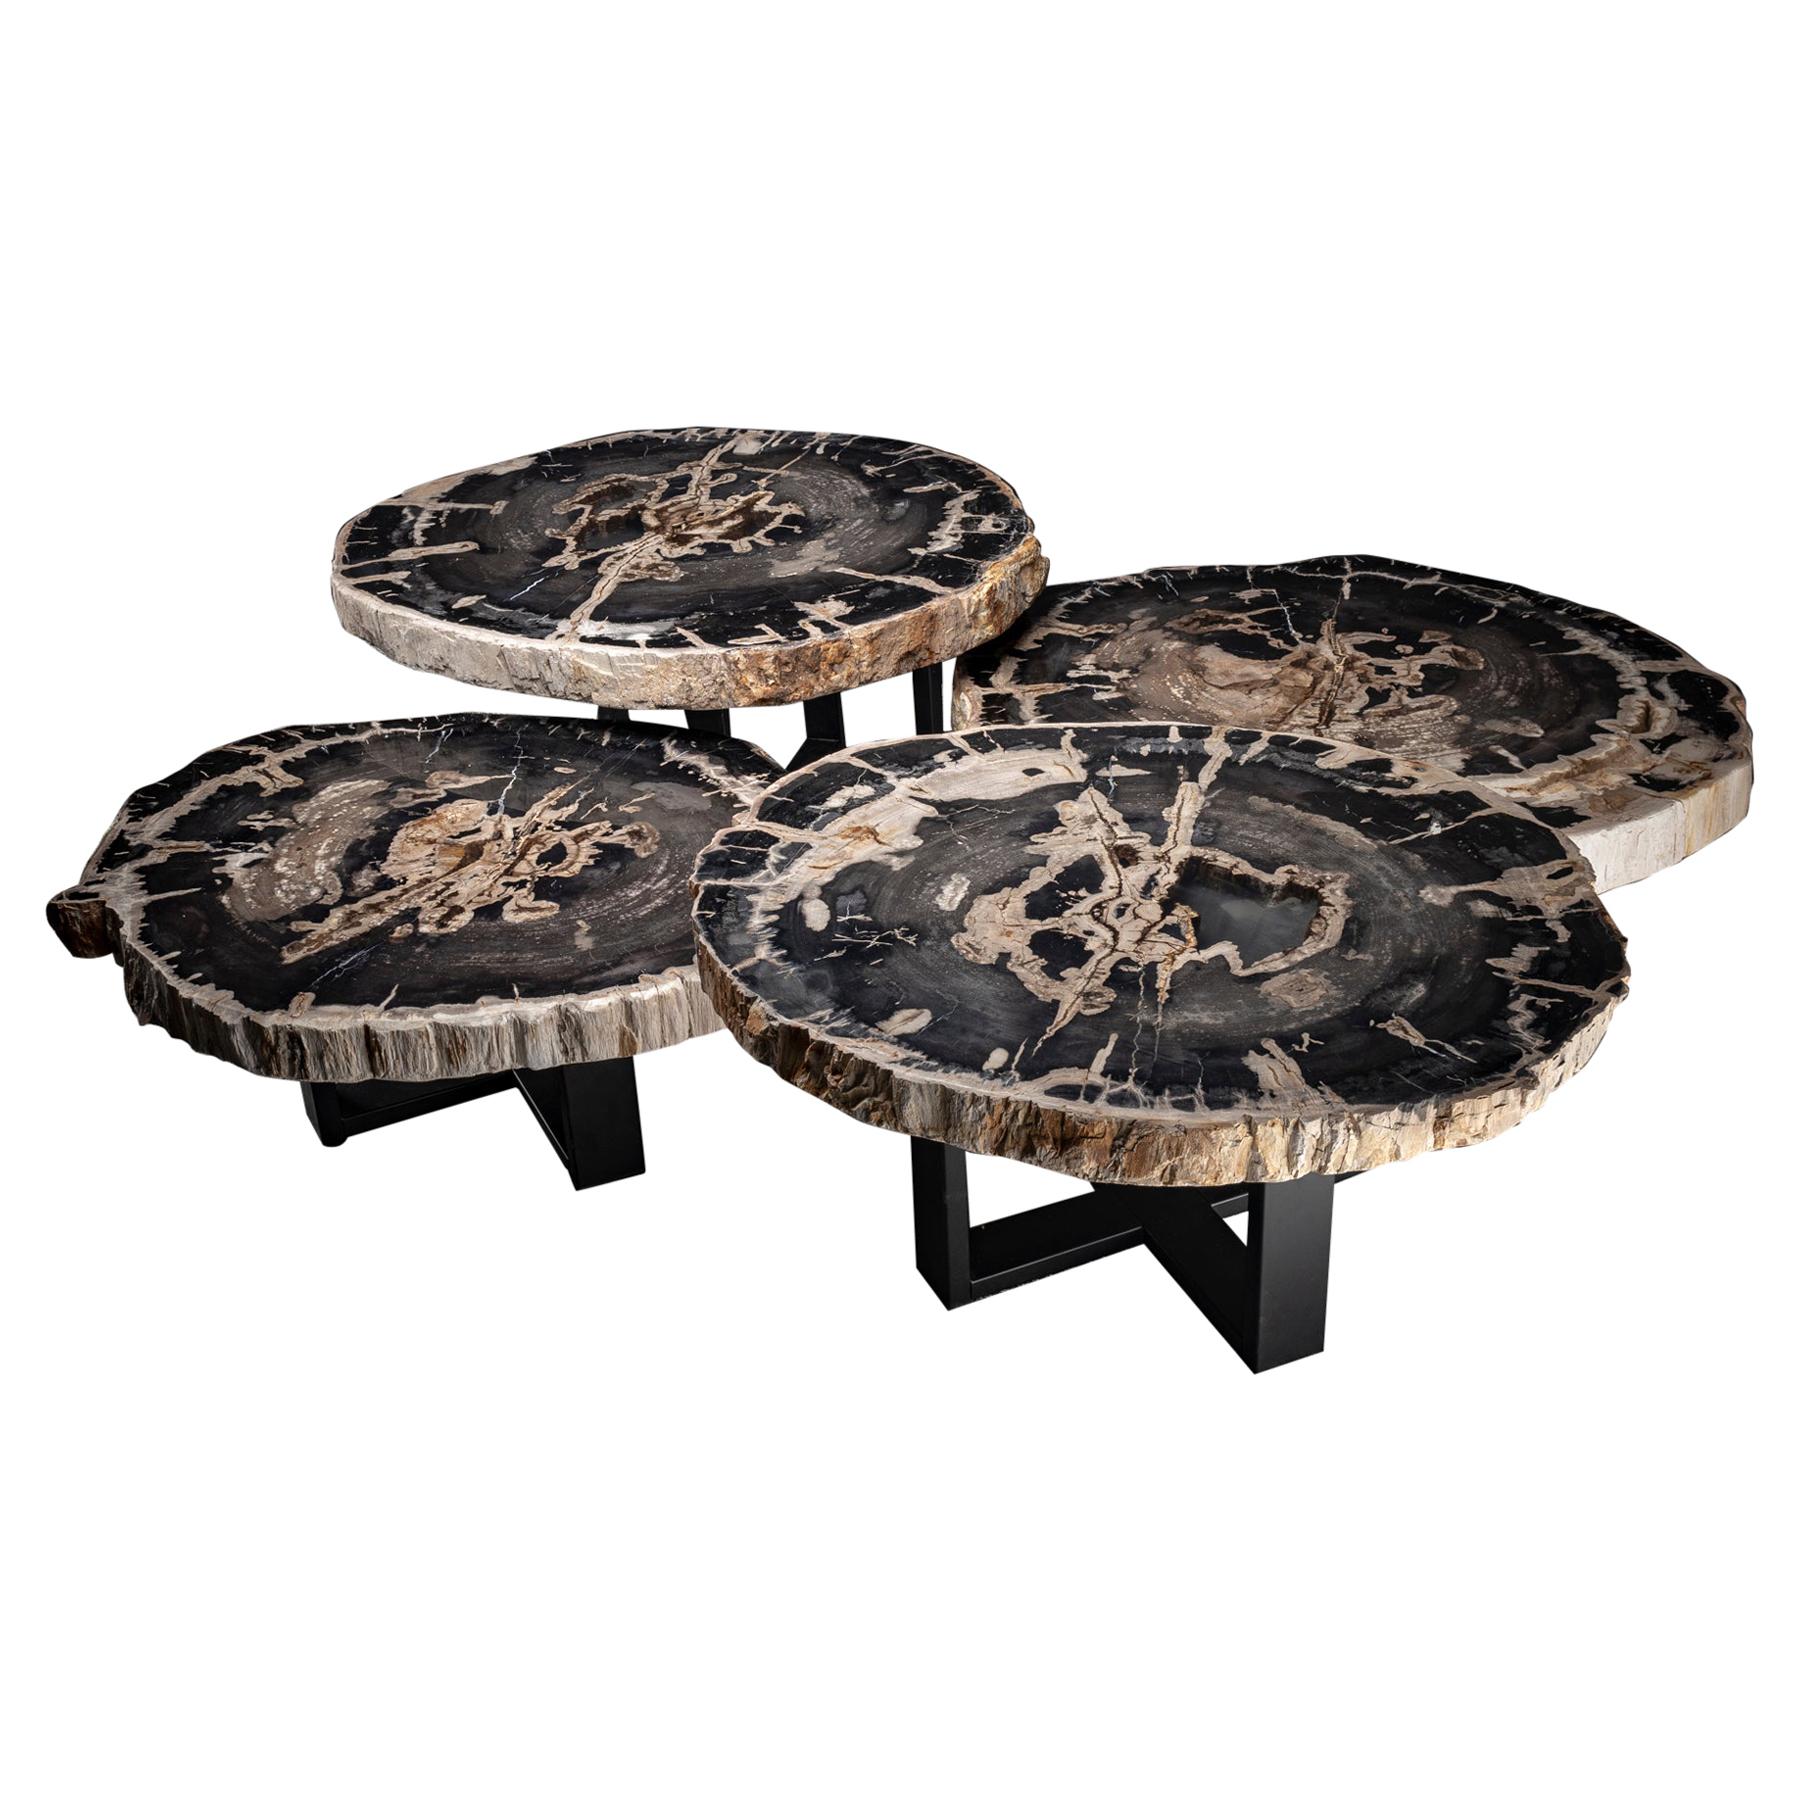 Center Table, Four-Piece Petrified Wood Table with Metal Base